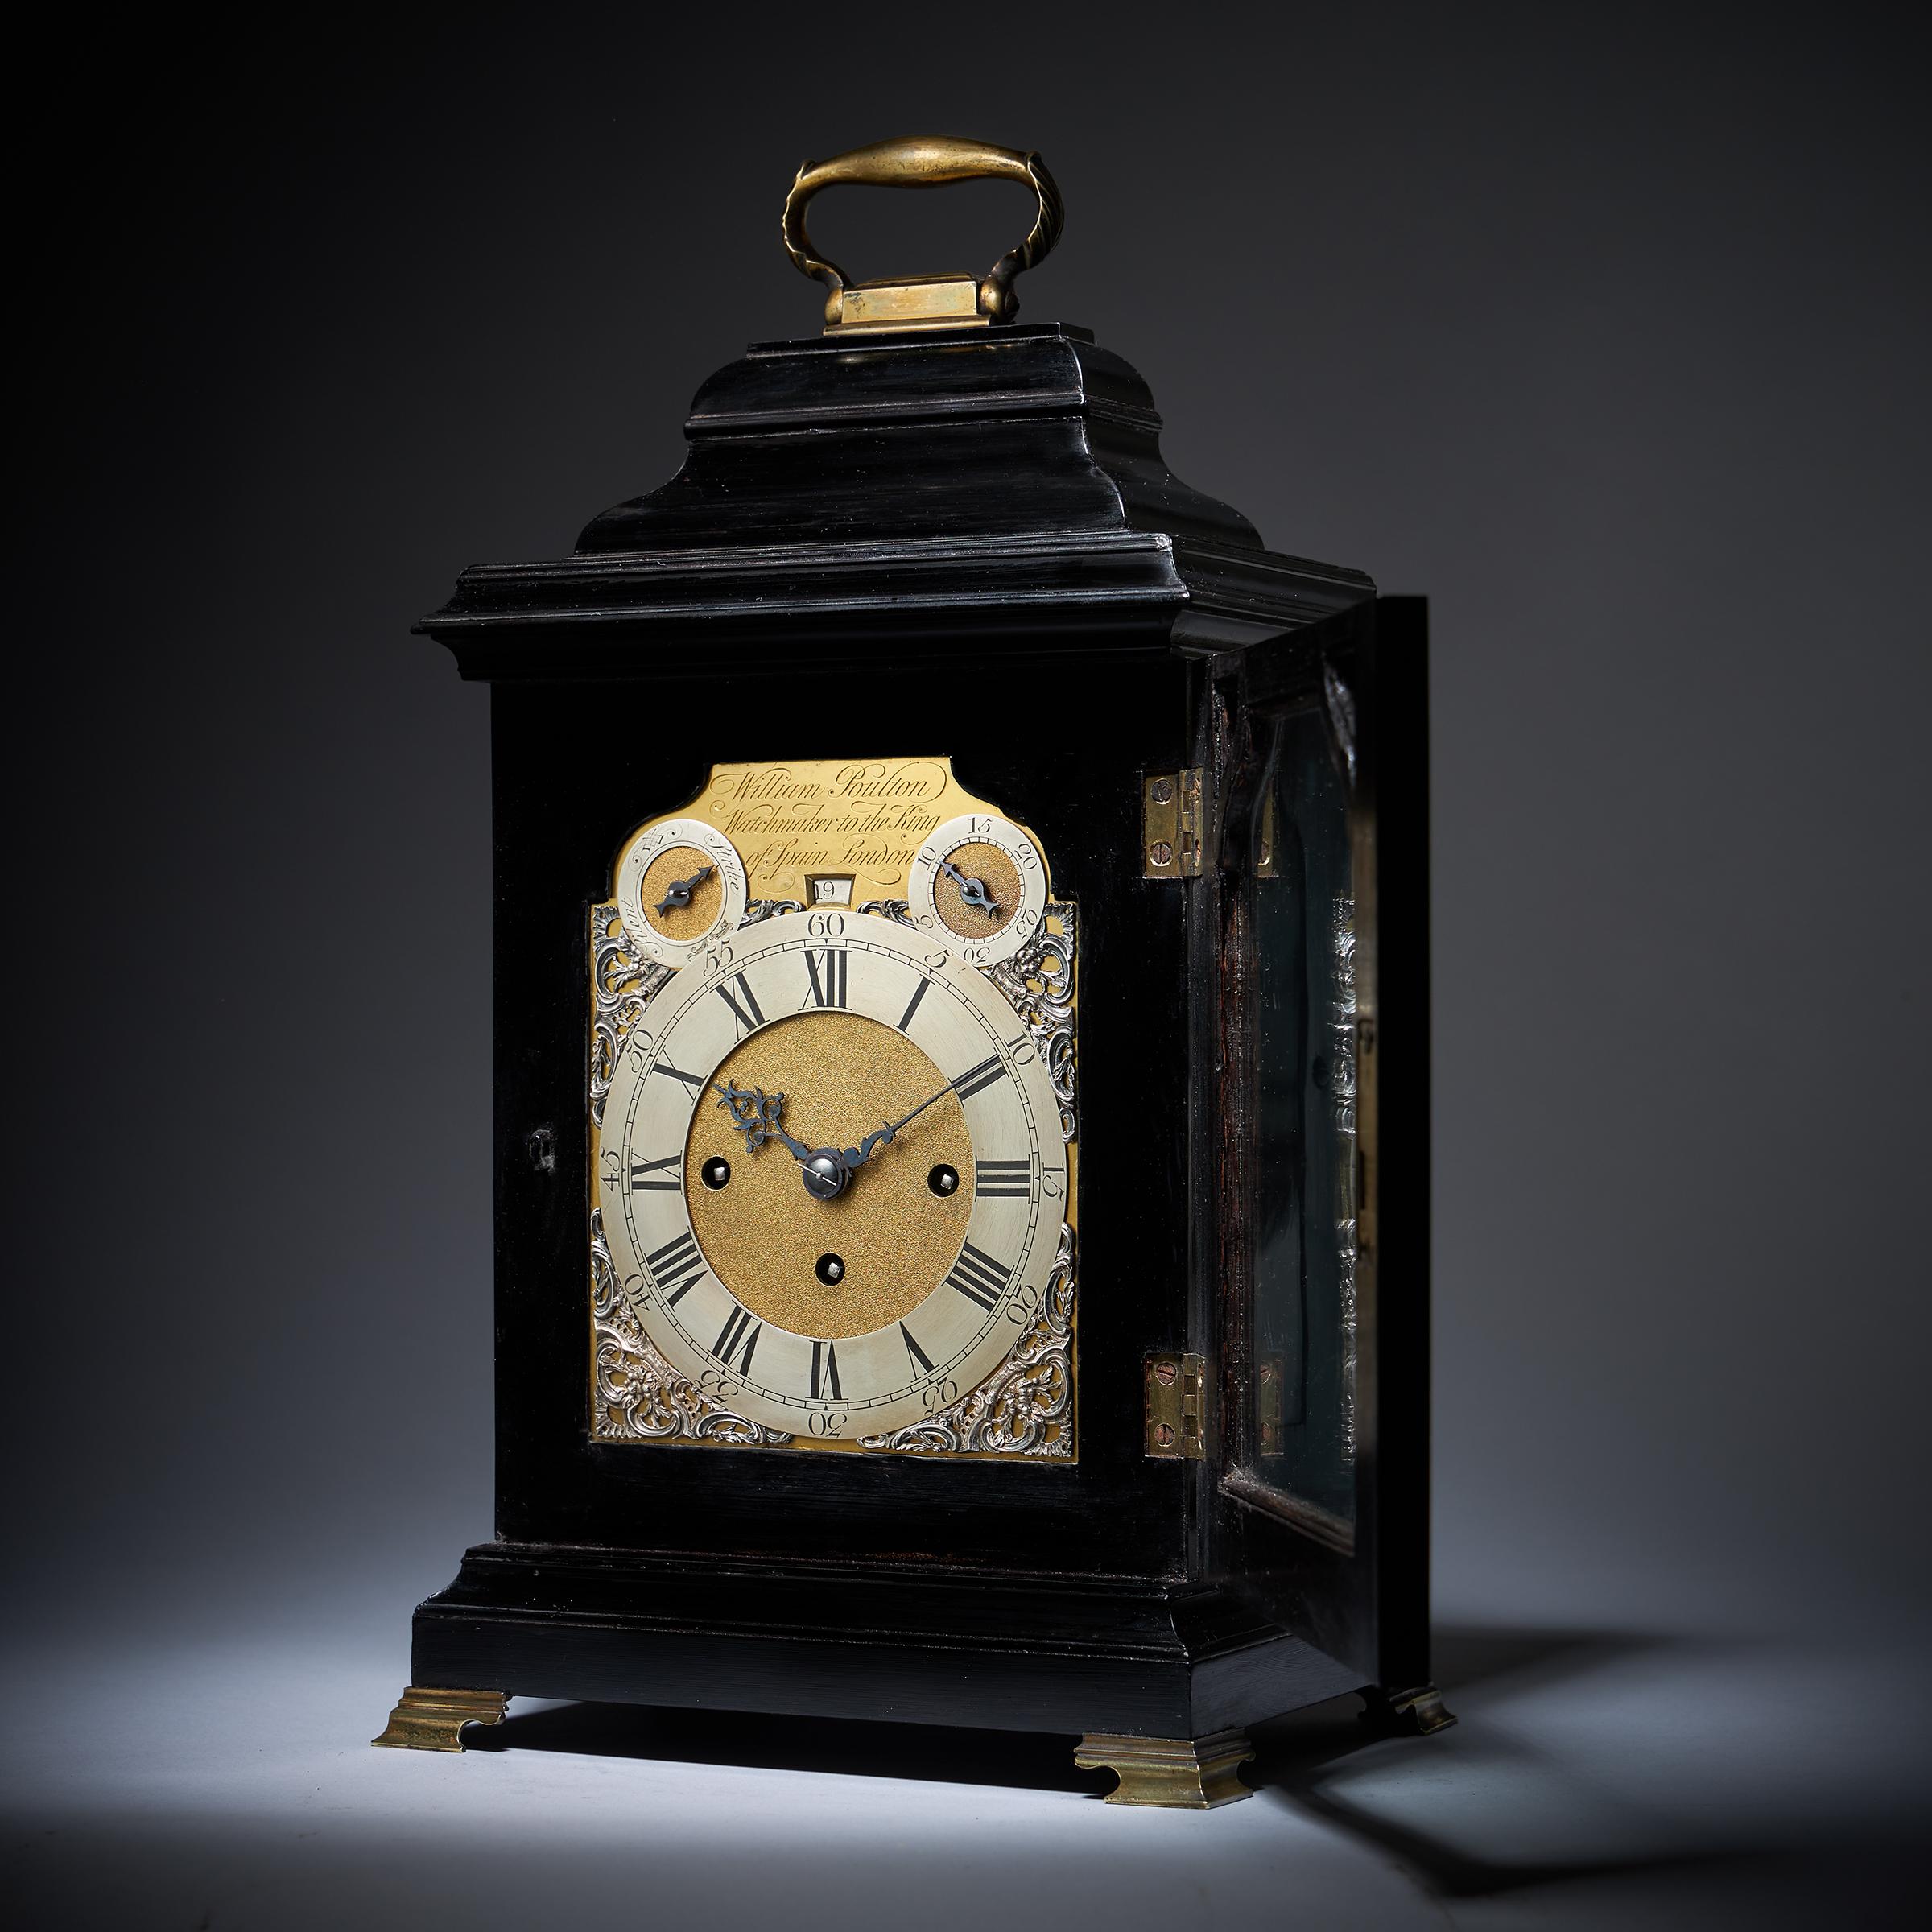 Rare 18th-Century Grande Sonnerie Striking table Clock by William Poulton 10